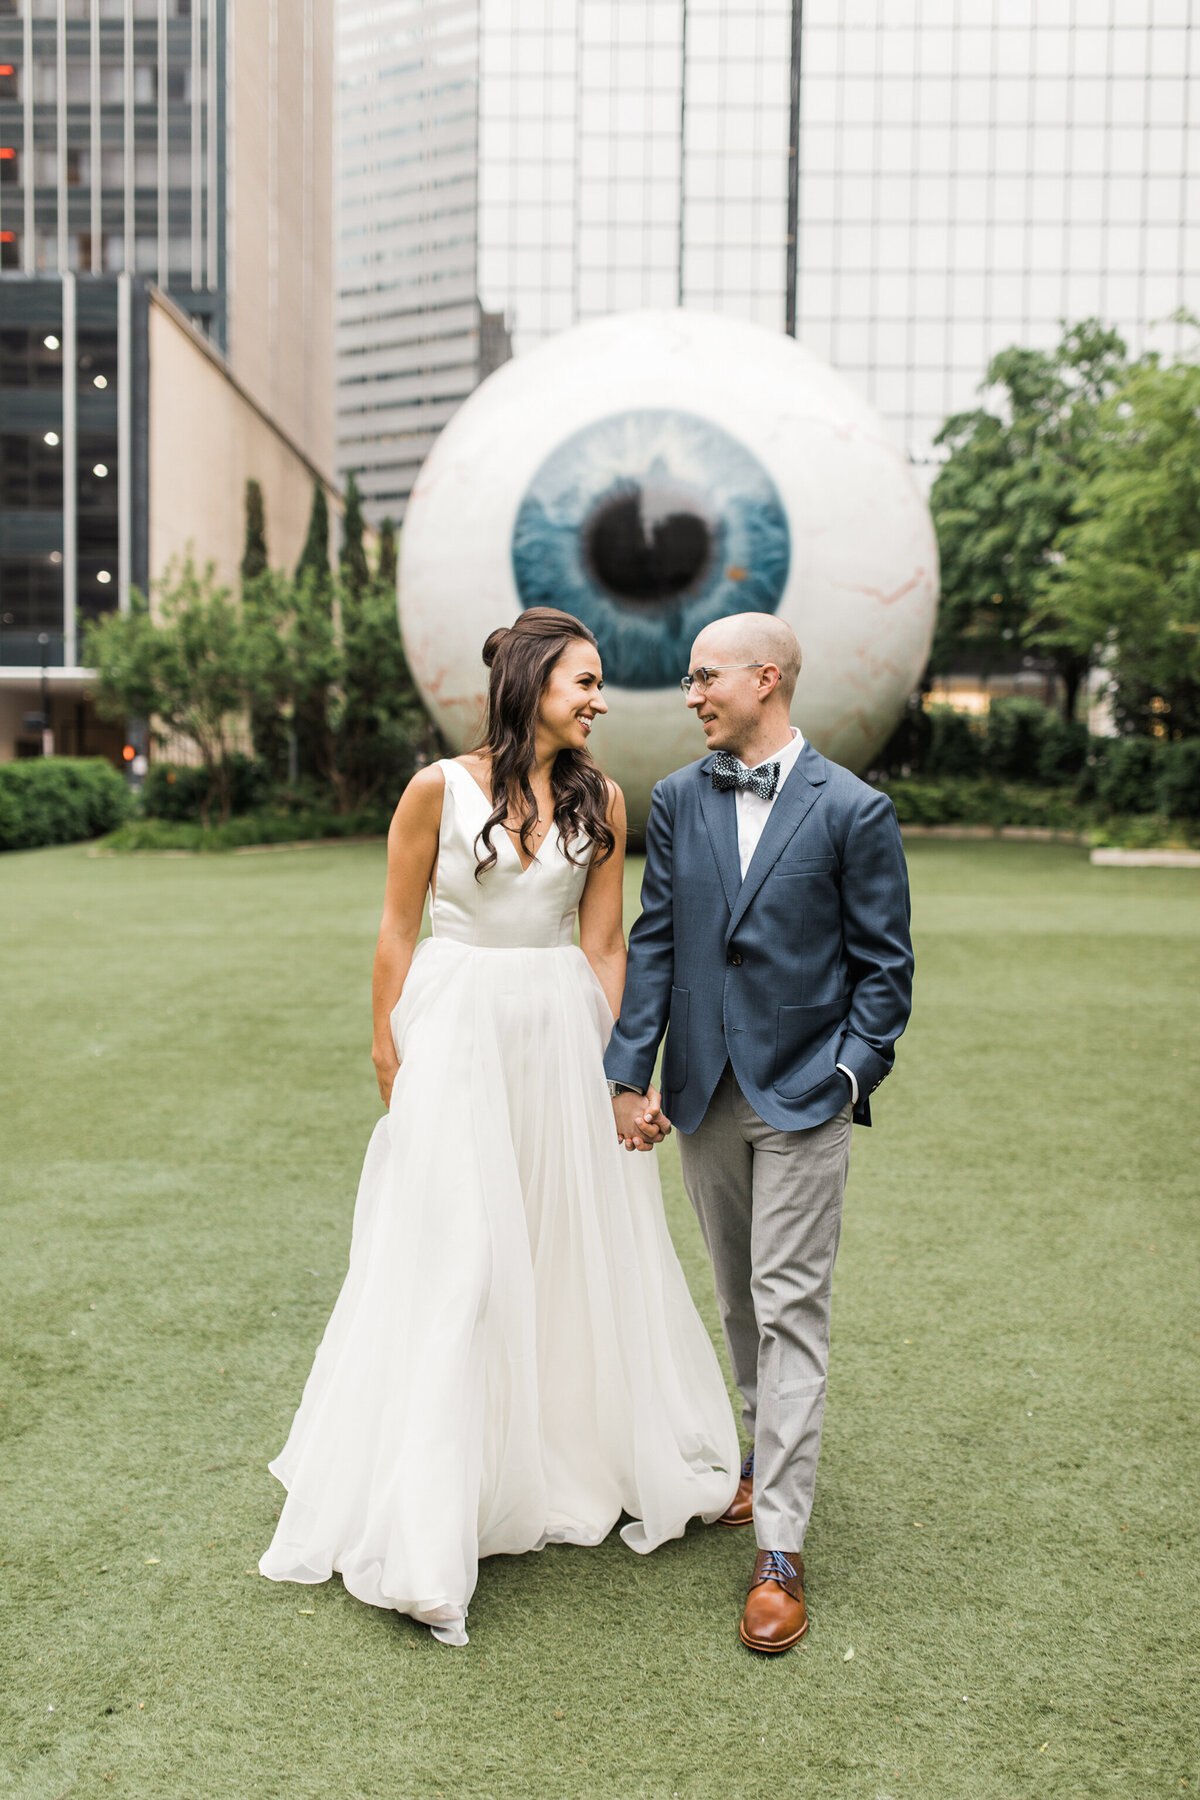 A portrait of a bride and groom walking in front of the Giant Eyeball on their wedding day in Dallas, Texas. The bride is on the left and is wearing a flowing, sleeveless, white dress. The groom is on the right and is wearing a navy jacket, grey dress pants, and a bowtie. They're both walking towards the camera while holding hands and looking joyfully at each other.